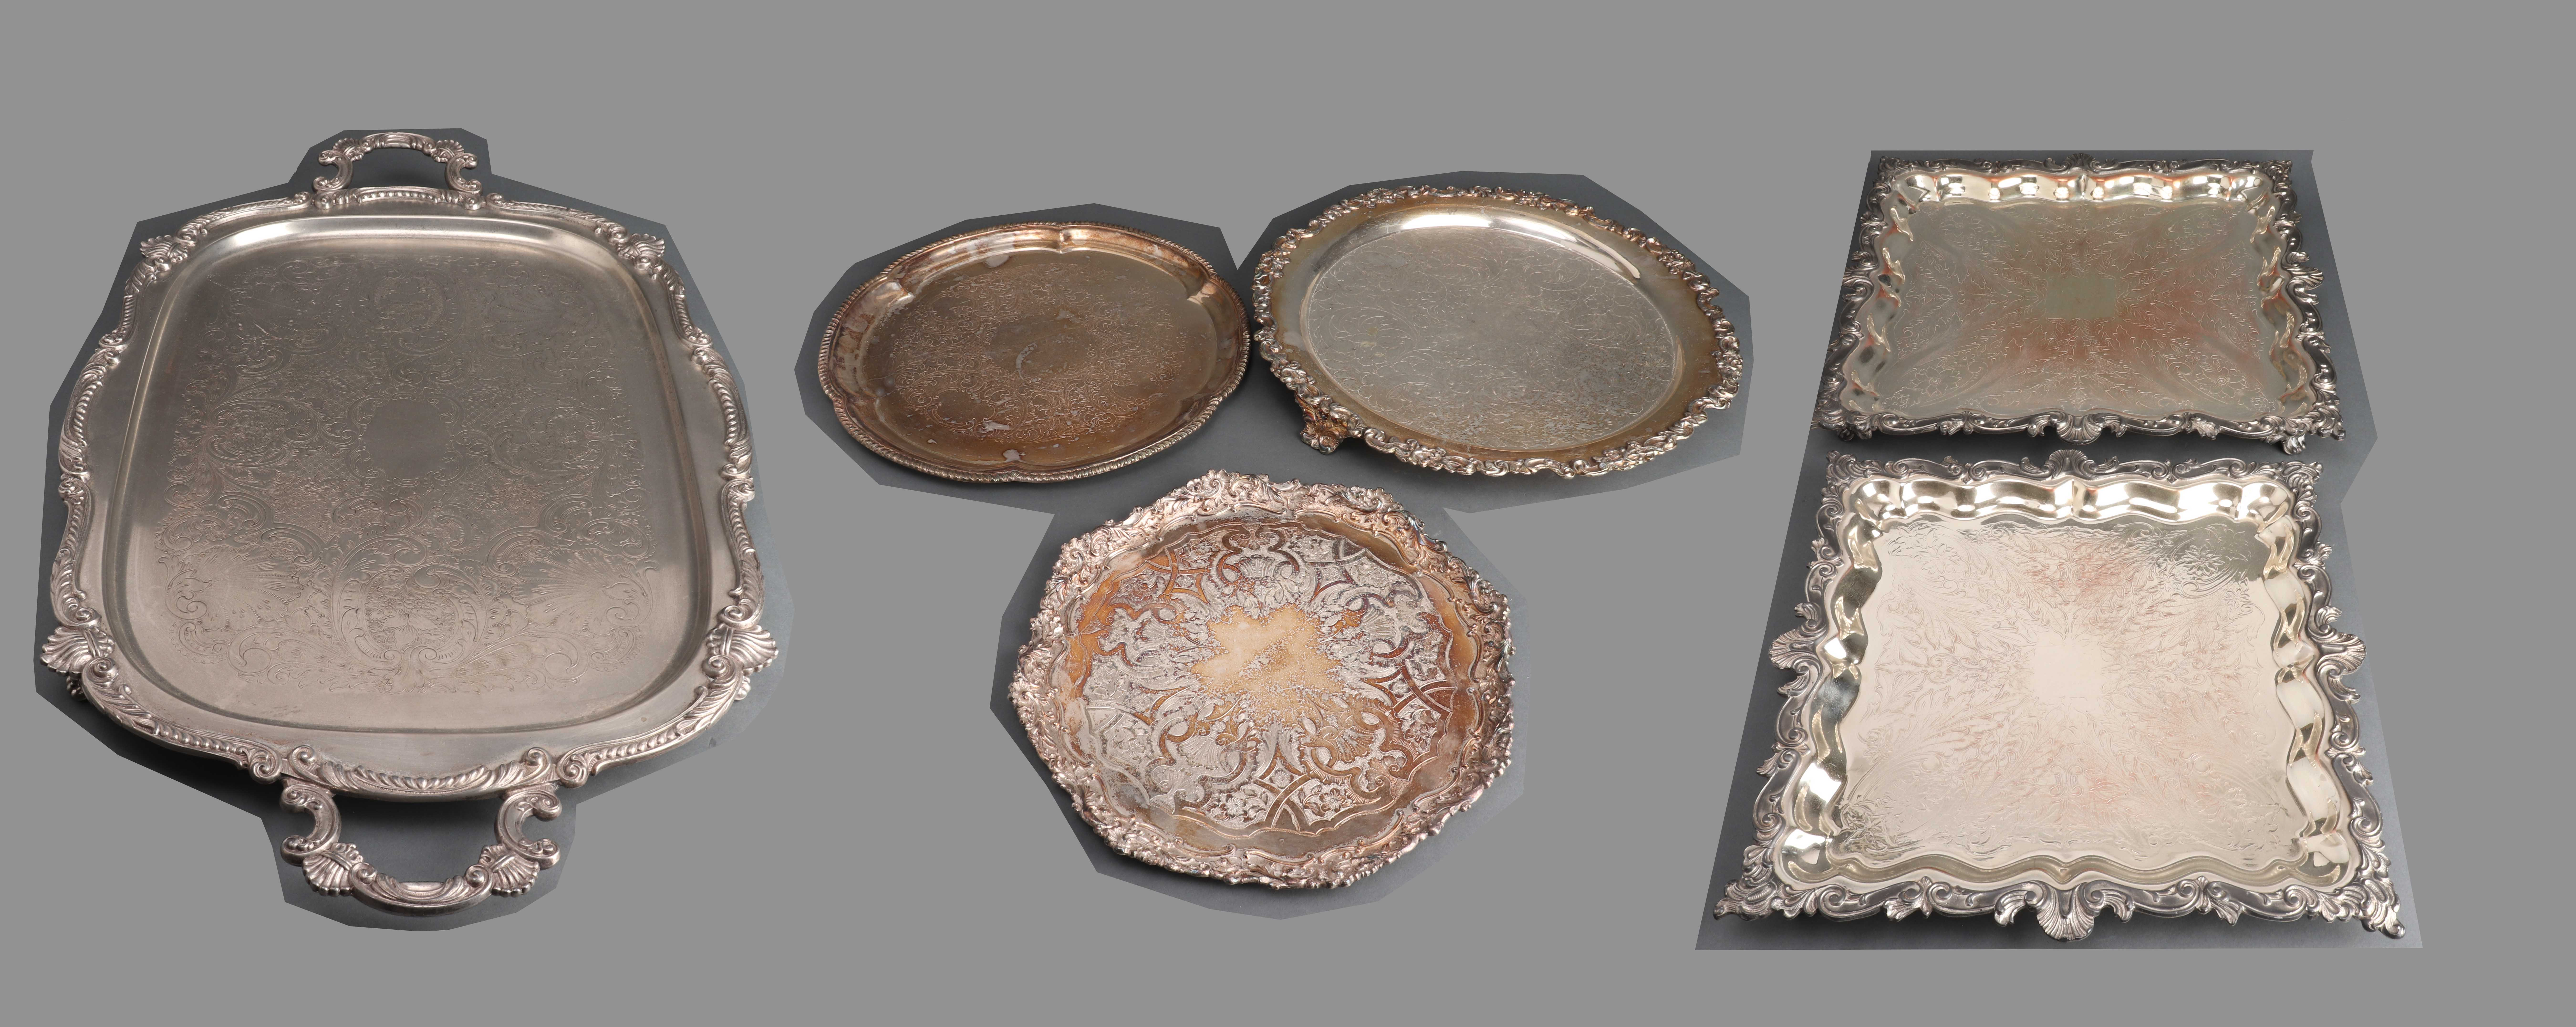 SILVER PLATED ORNATELY DECORATED 3c37db